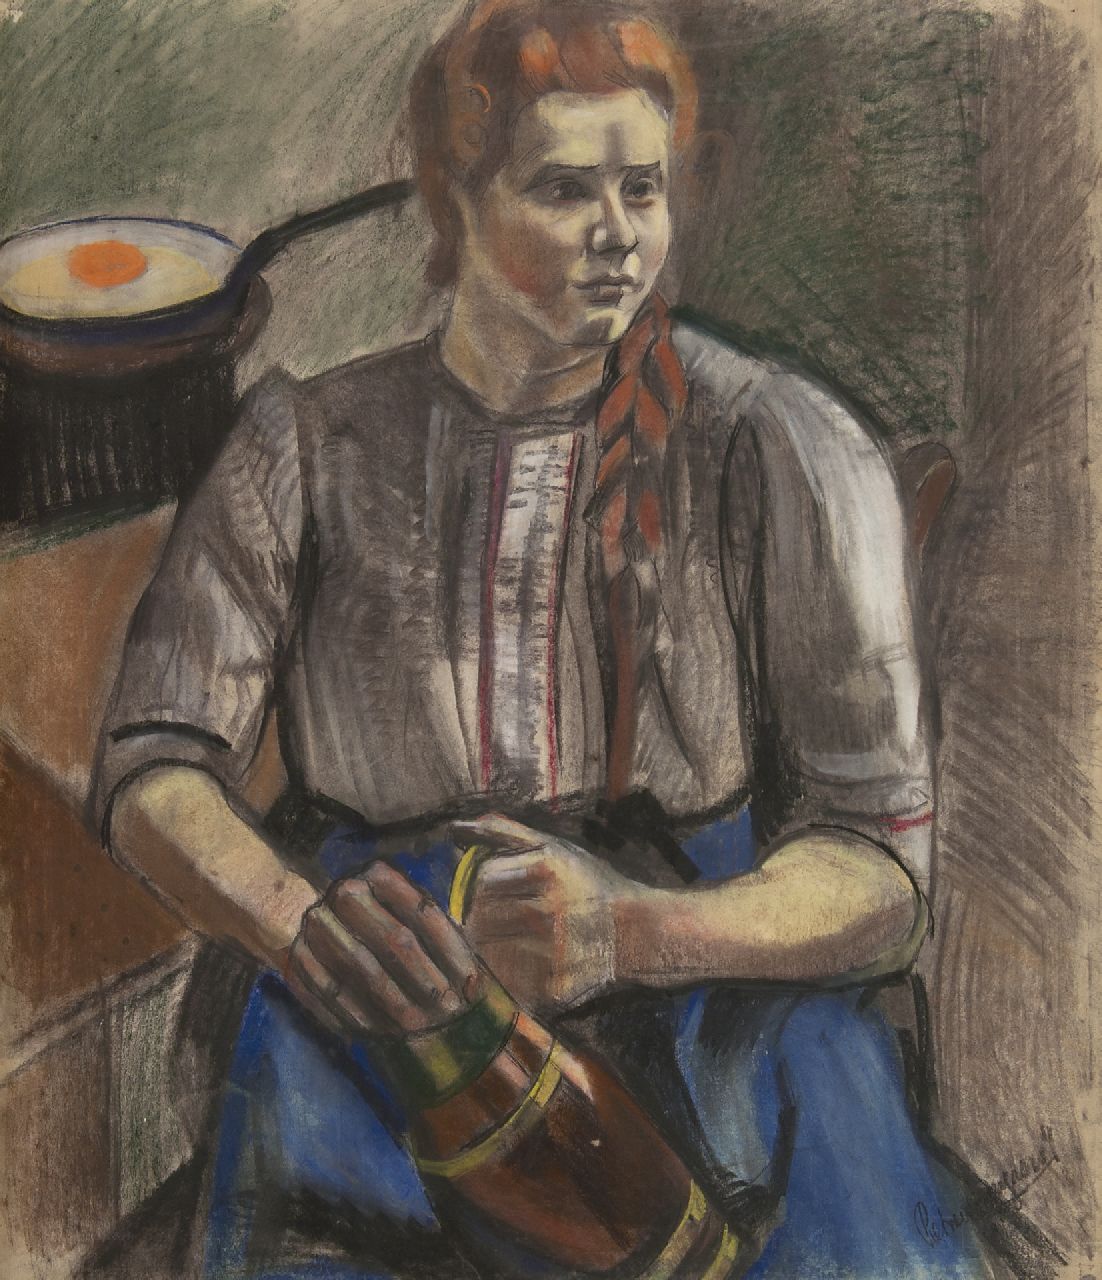 Wijngaerdt P.T. van | Petrus Theodorus 'Piet' van Wijngaerdt | Watercolours and drawings offered for sale | Kitchen interior with a farm maid, charcoal and pastel on paper 100.0 x 87.0 cm, signed l.r. and pained ca. 1921